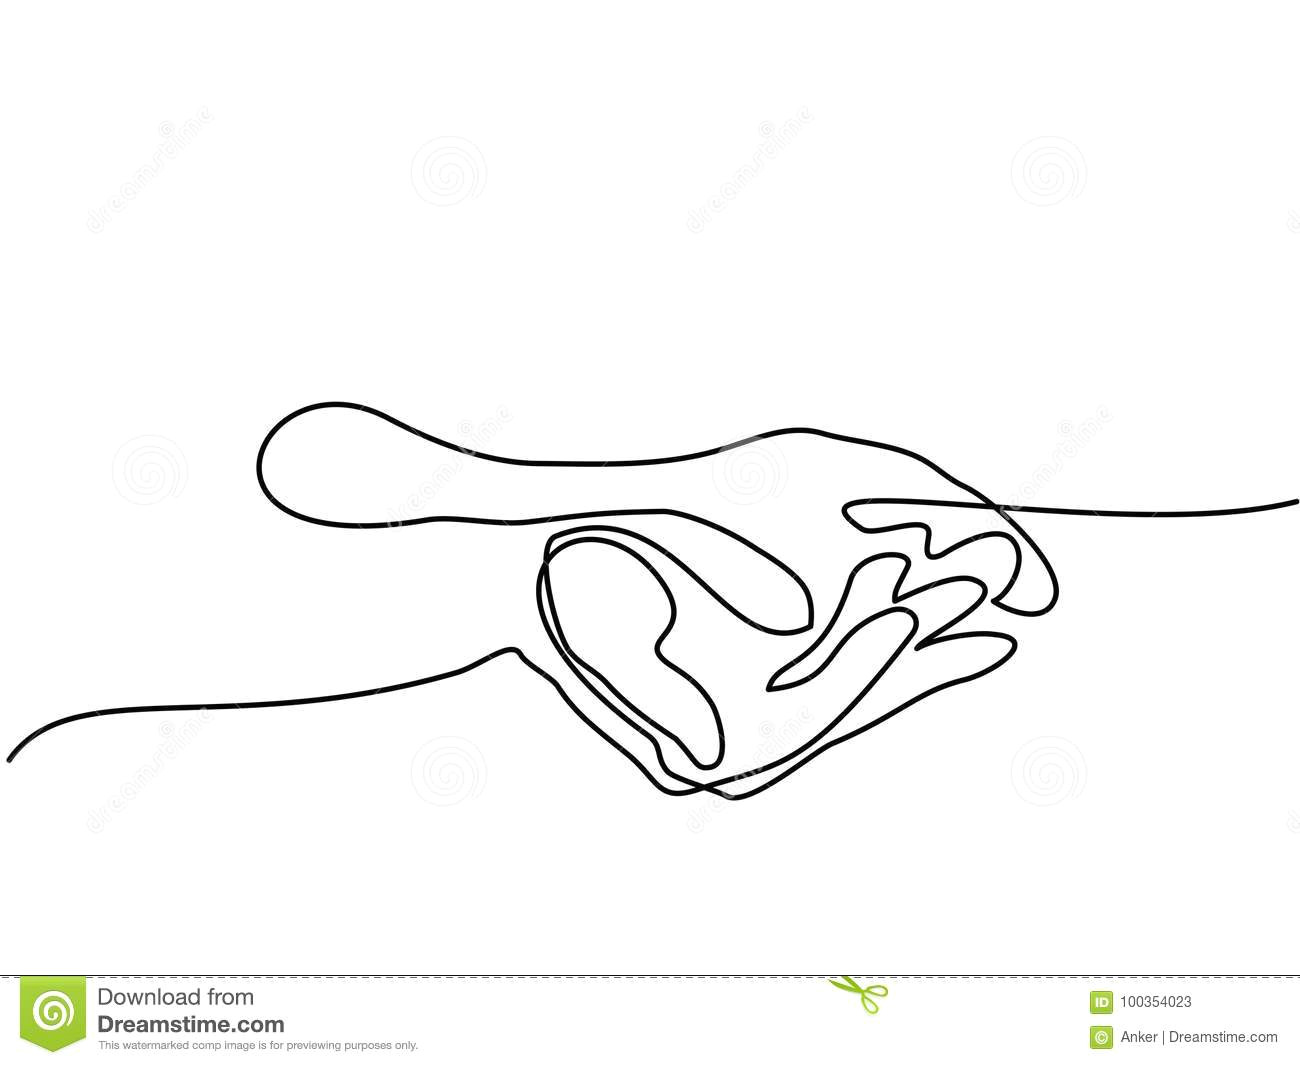 Drawings Of Hands together Hands Palms together Stock Vector Illustration Of Single 100354023